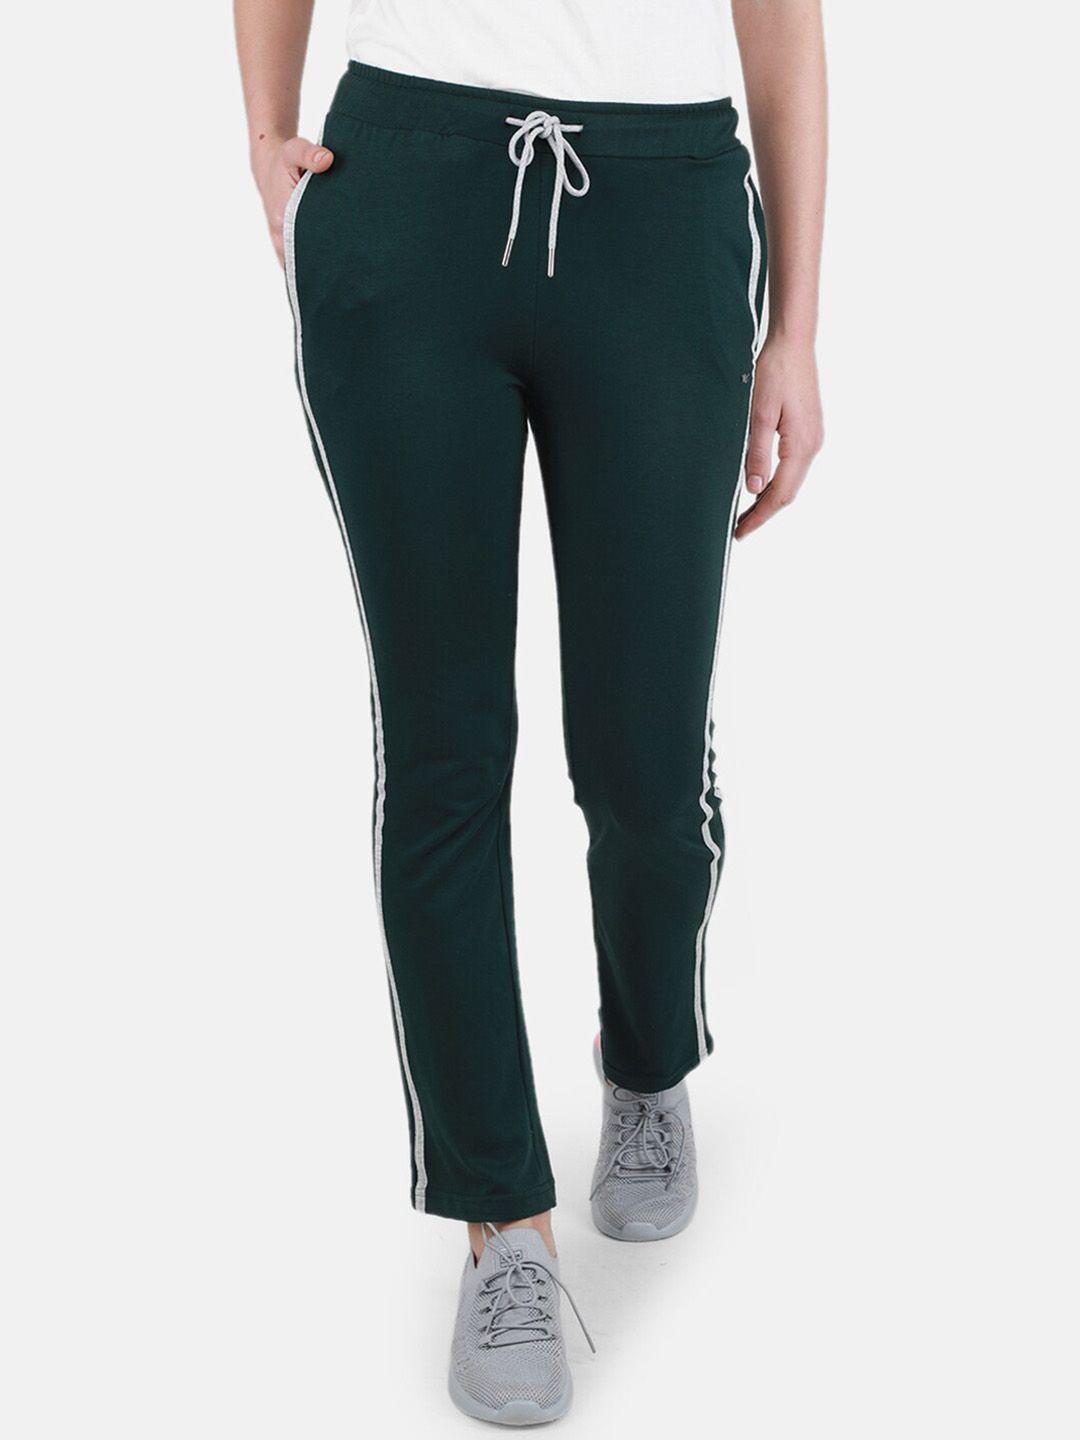 monte carlo women side tapered track pants